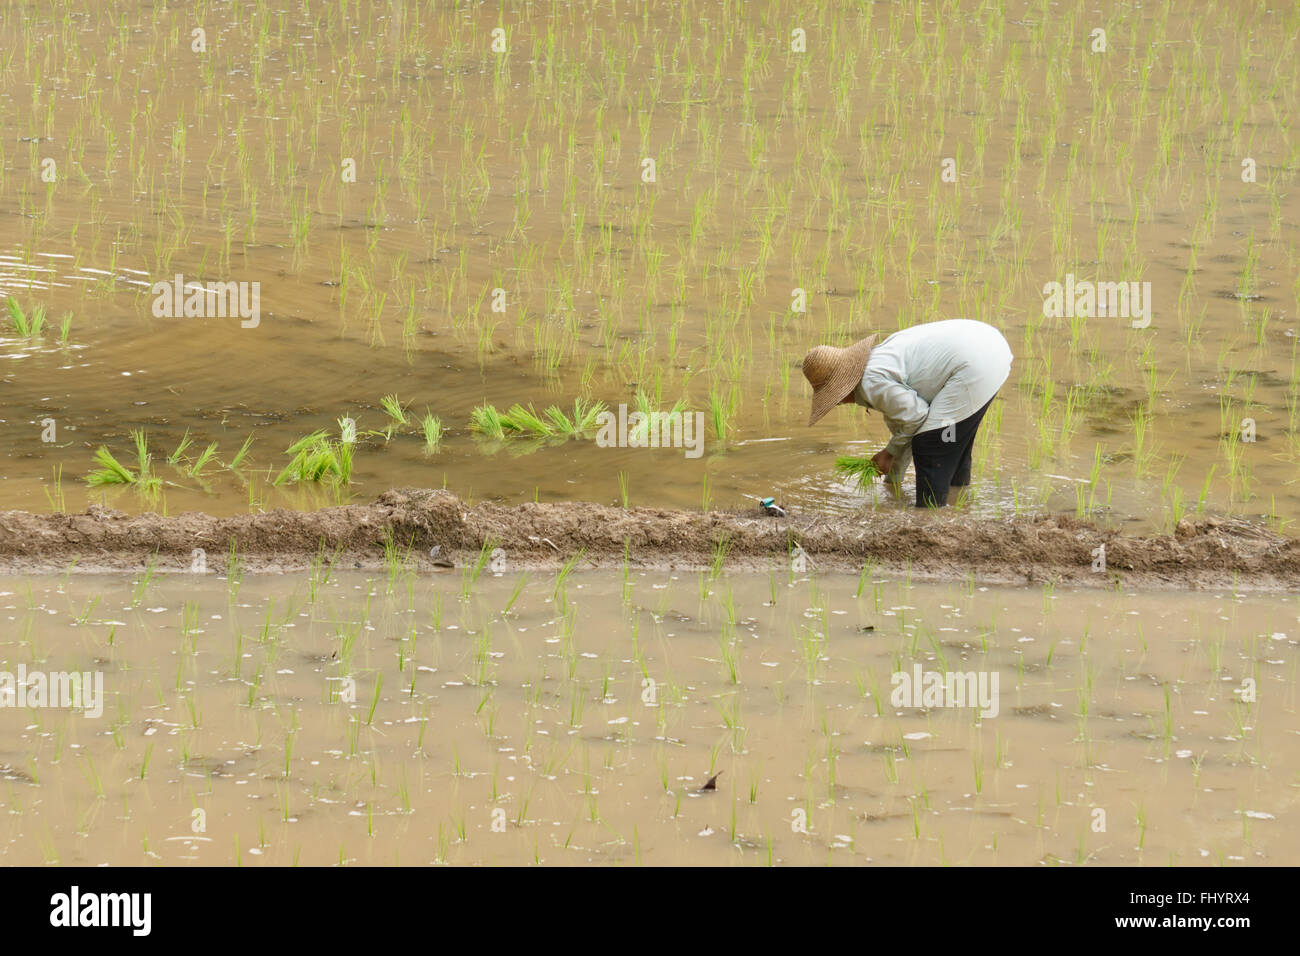 Malaysian farmer planting rice in the paddy fields with water. Stock Photo